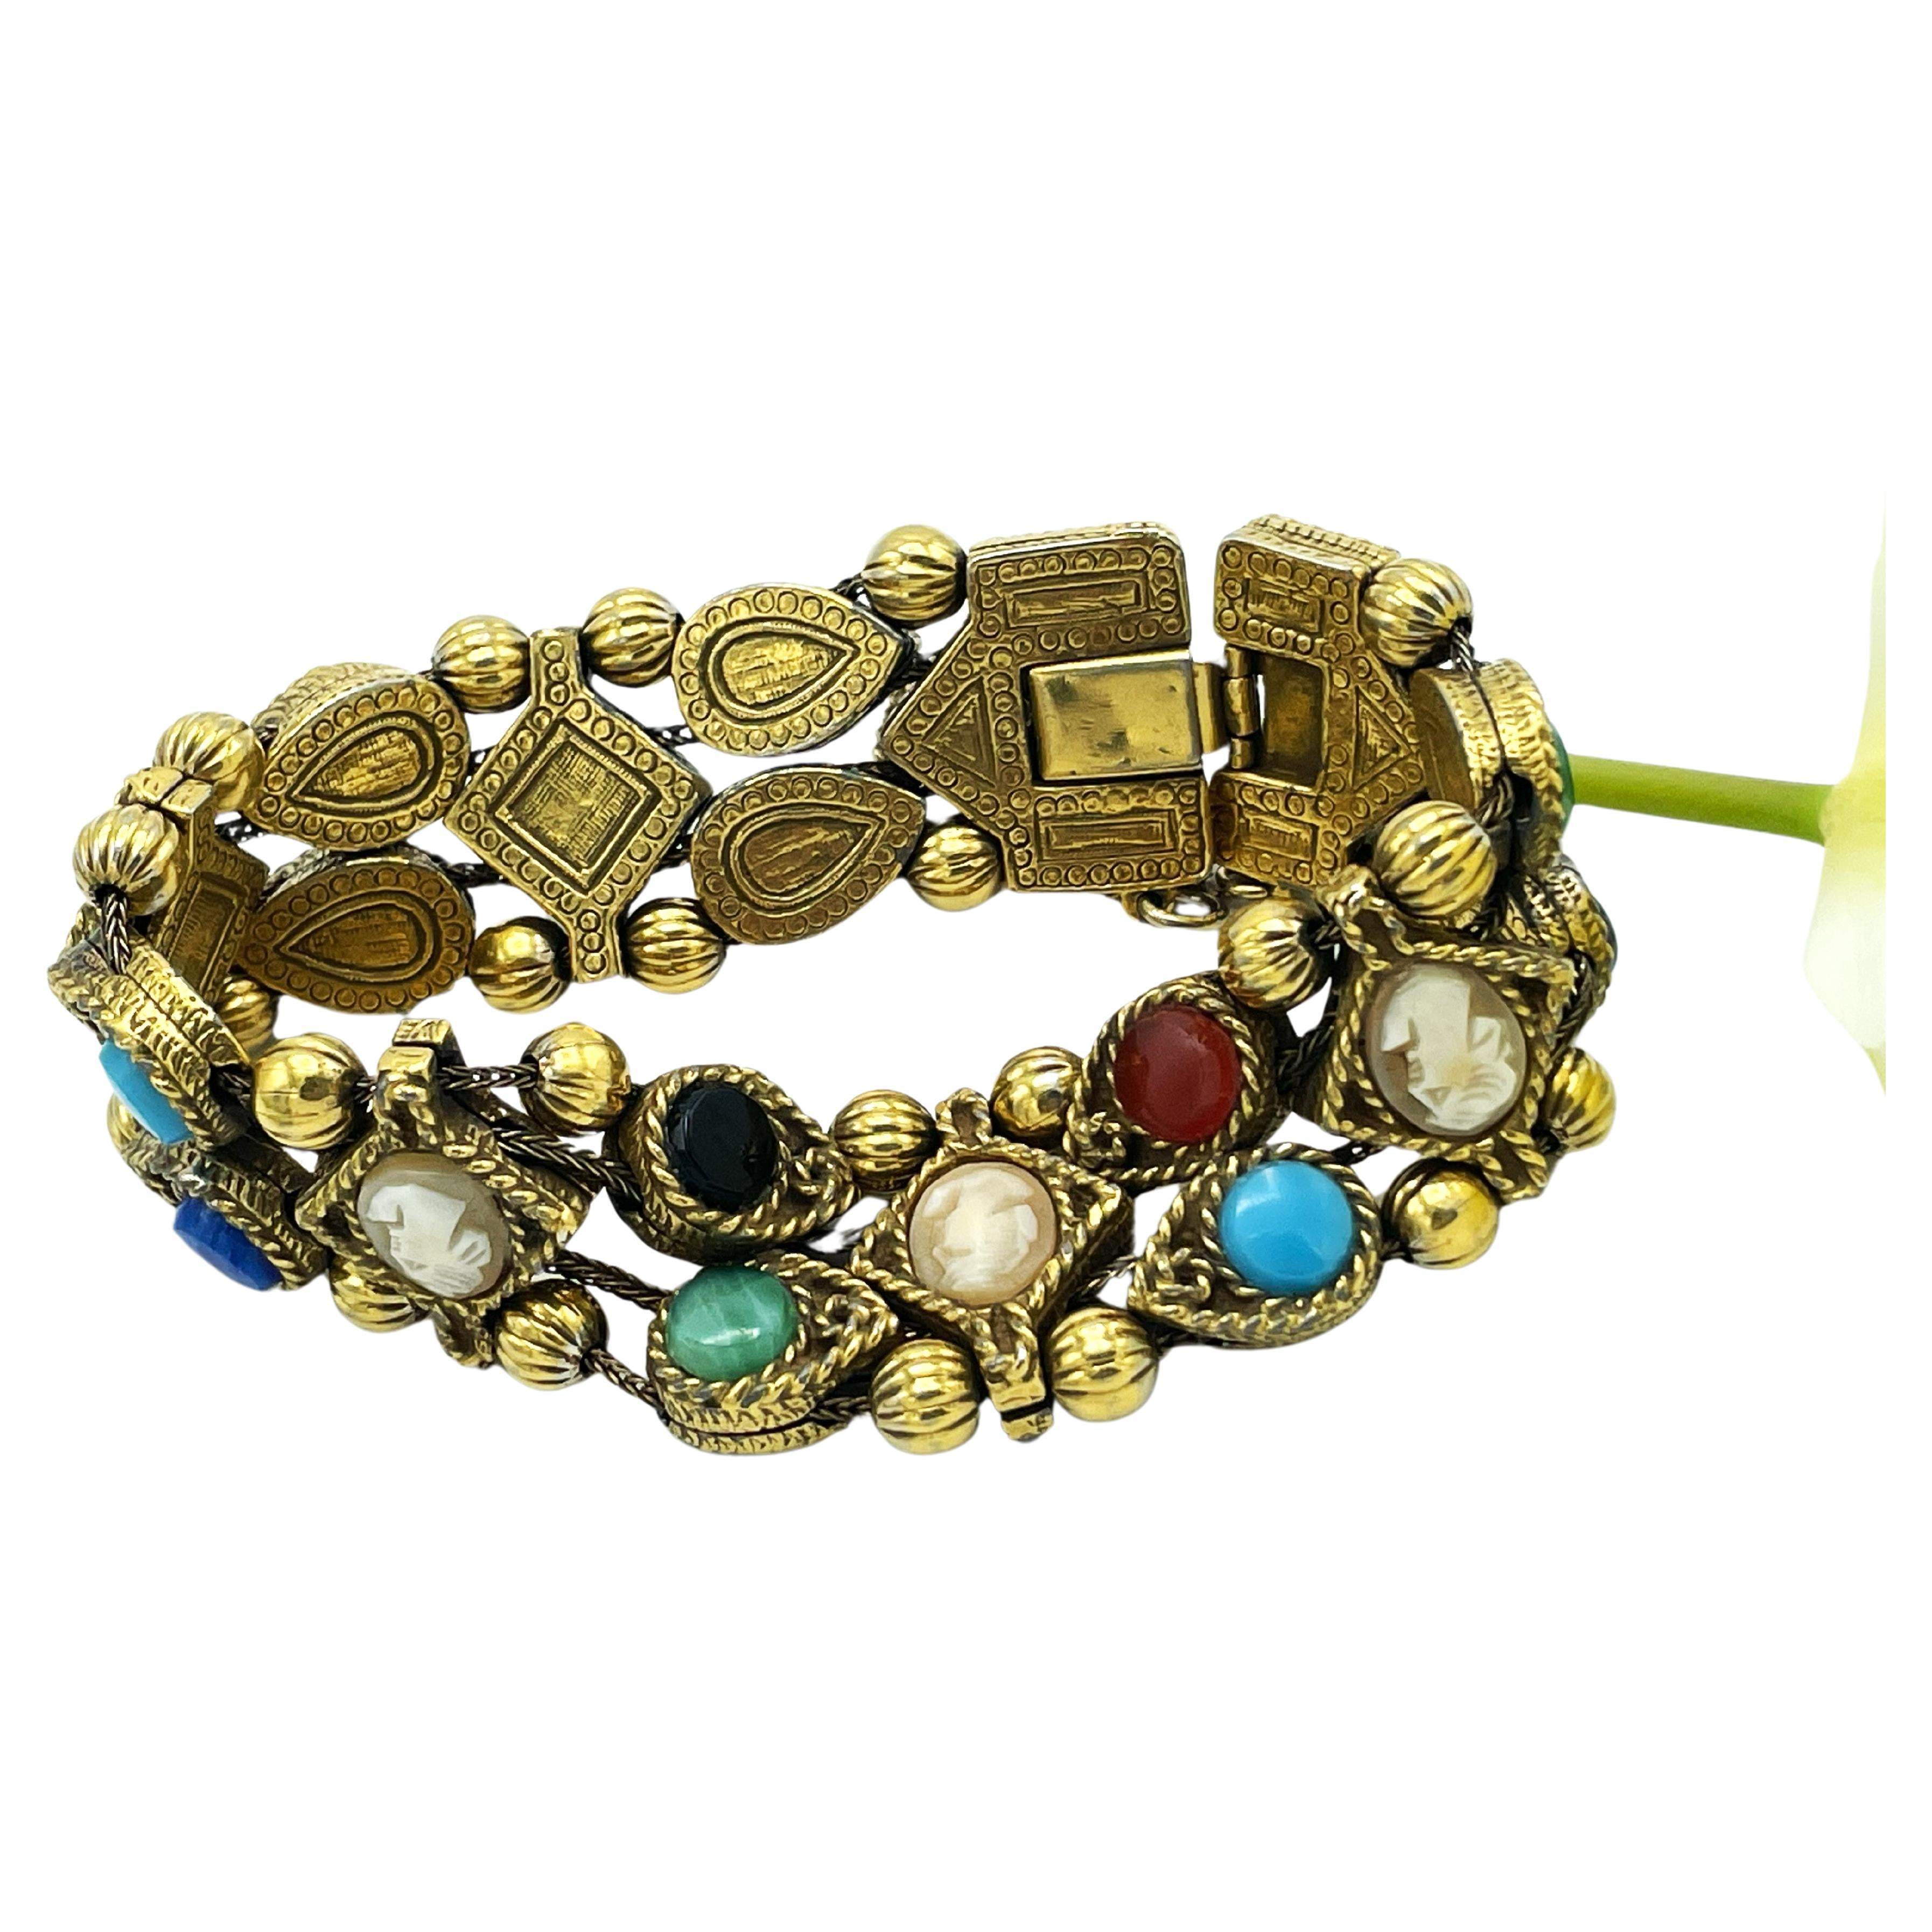  3 rows of movable Bracelet with gems and colorful glass stones, gold plated  For Sale